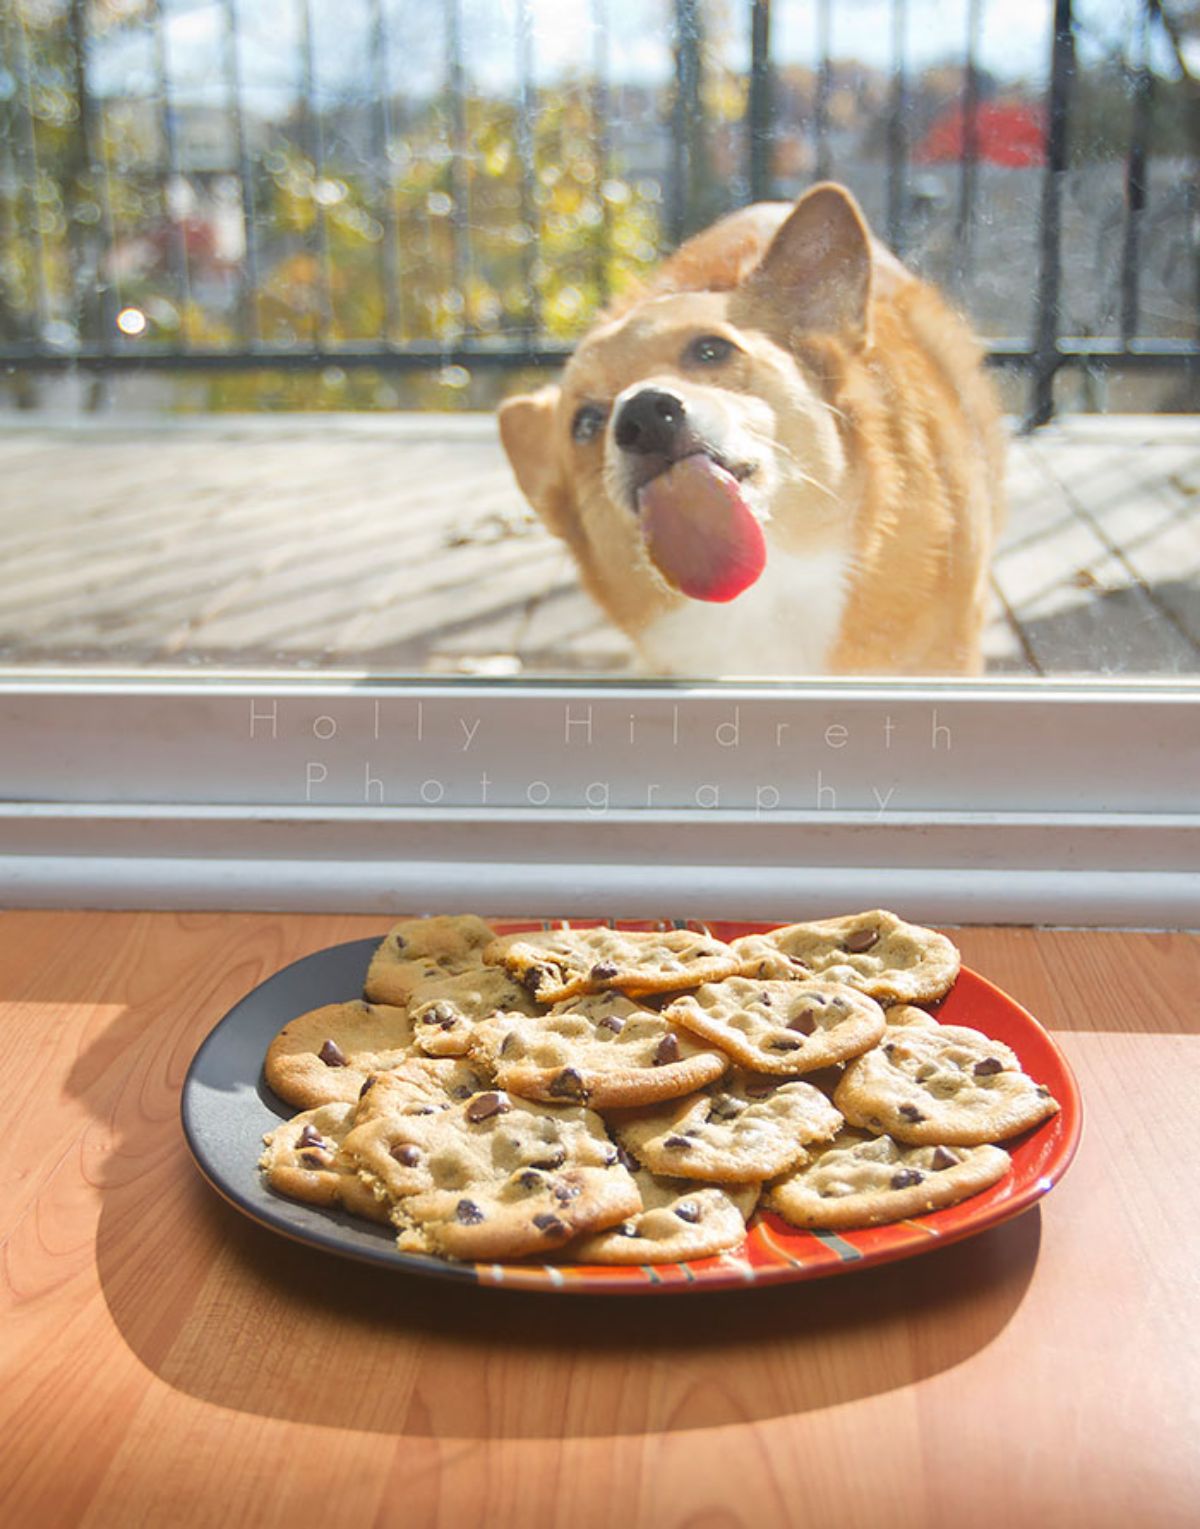 brown and white corgi licking a window with a plate of cookies on the other side of the window